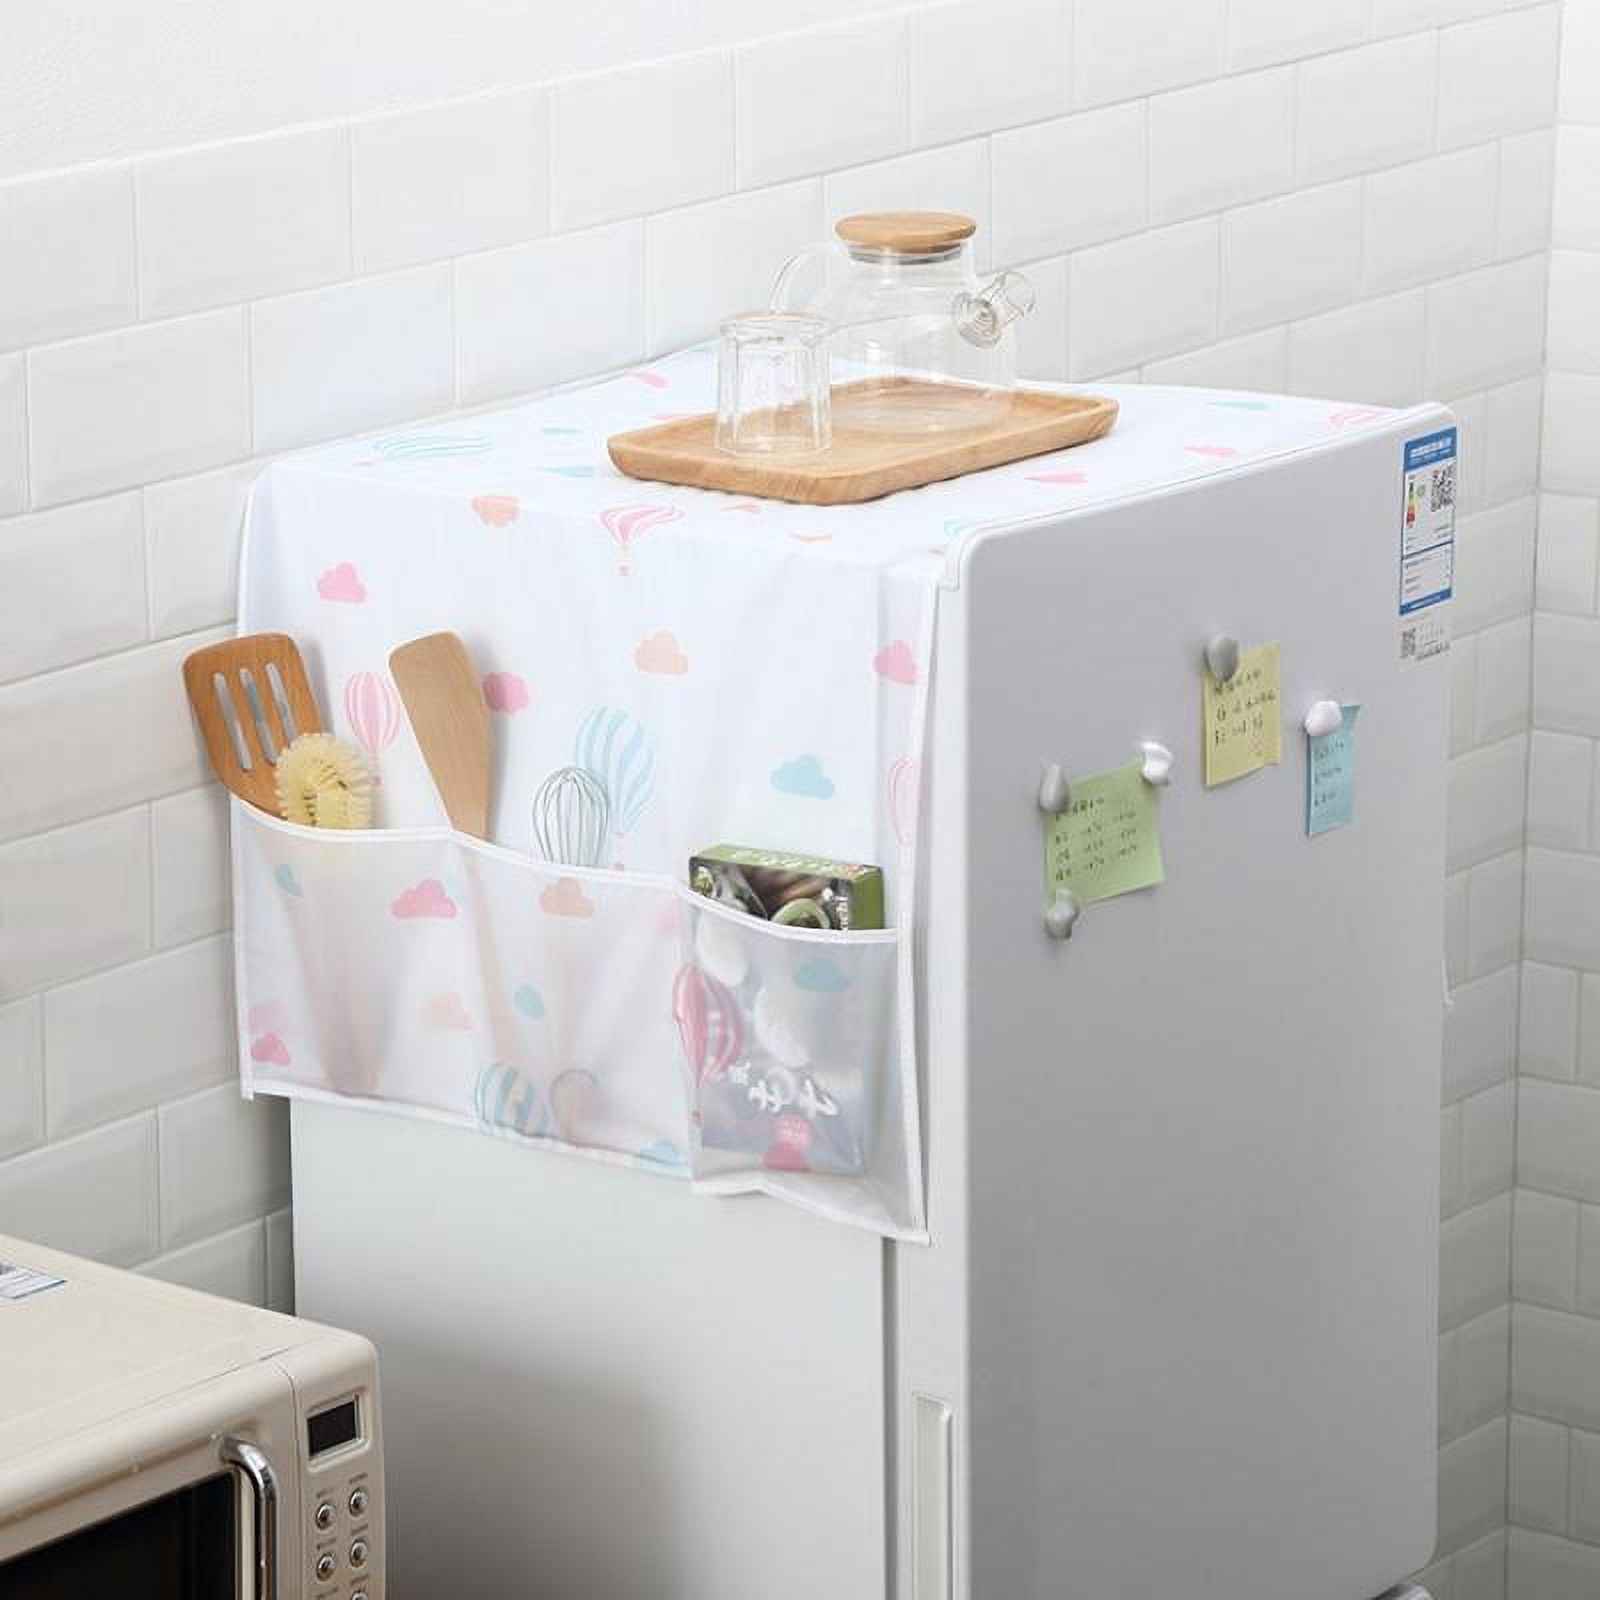 Fridge Cover With Pockets - Washer Dryer Top Protector Mat - All-purpose  Home Decoration For Cabinet, Countertop, Mini Table, Desktop, Refrigerator